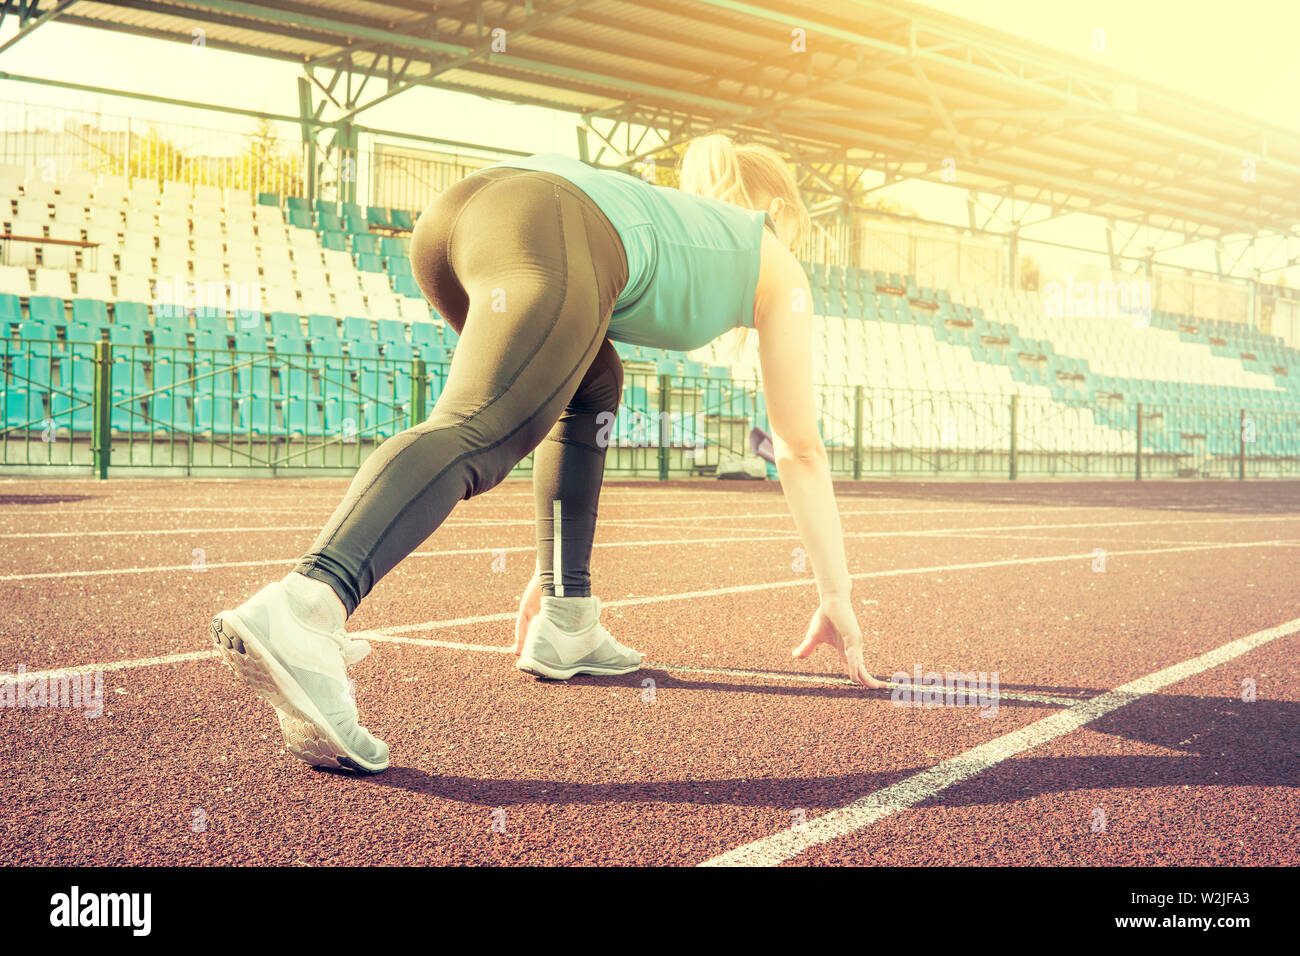 Ready to go. Young fitness girl wearing blue top, black tights, sneakers and pony-tail on the starting line of stadium track, preparing for a run Stock Photo